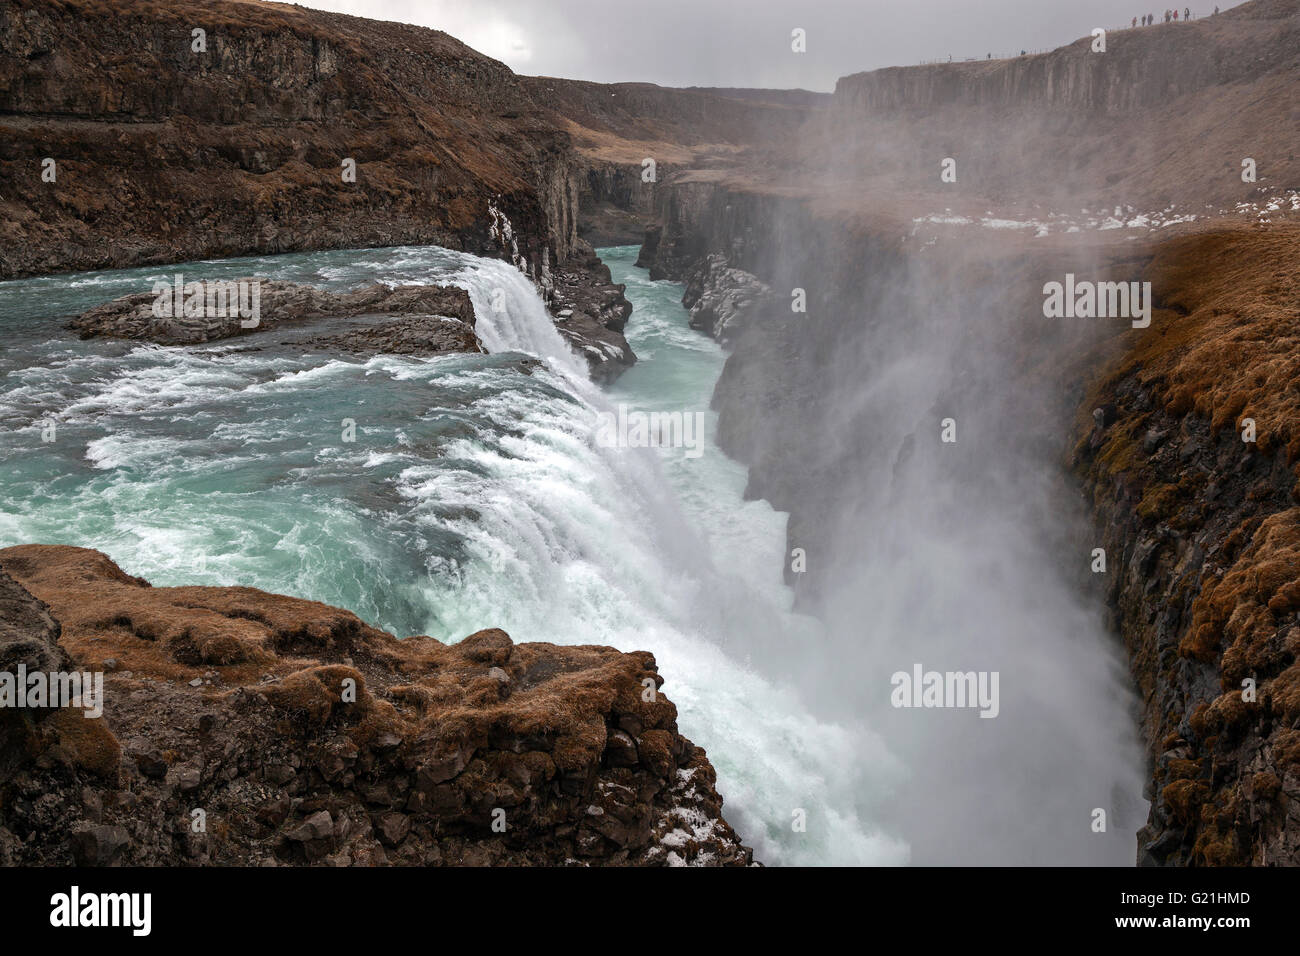 Waterfall, Gullfoss, tourist attractions, Golden Circle Route Route, Iceland Stock Photo